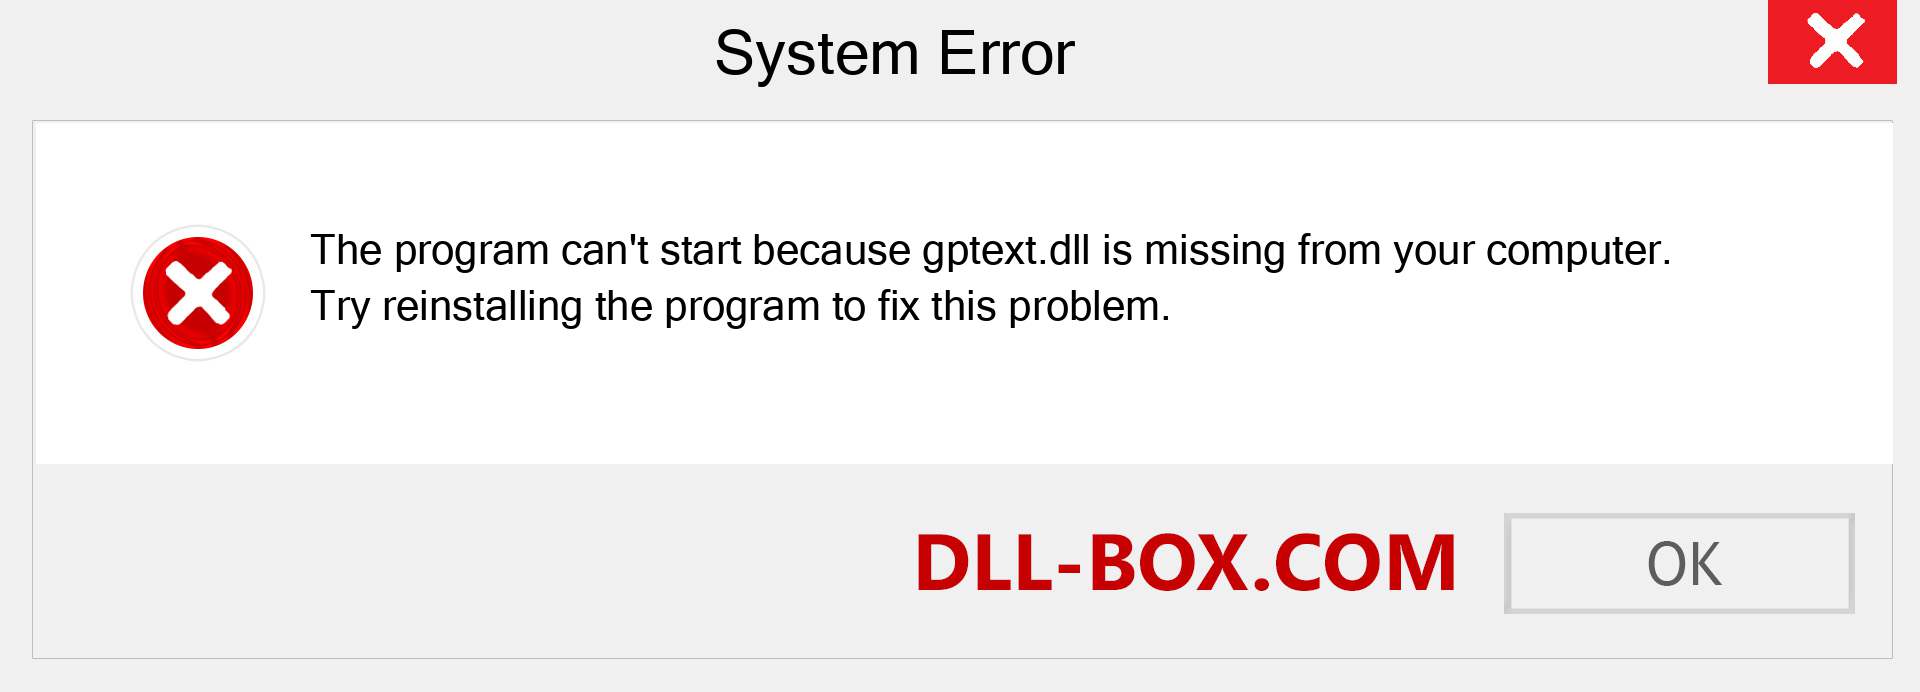  gptext.dll file is missing?. Download for Windows 7, 8, 10 - Fix  gptext dll Missing Error on Windows, photos, images